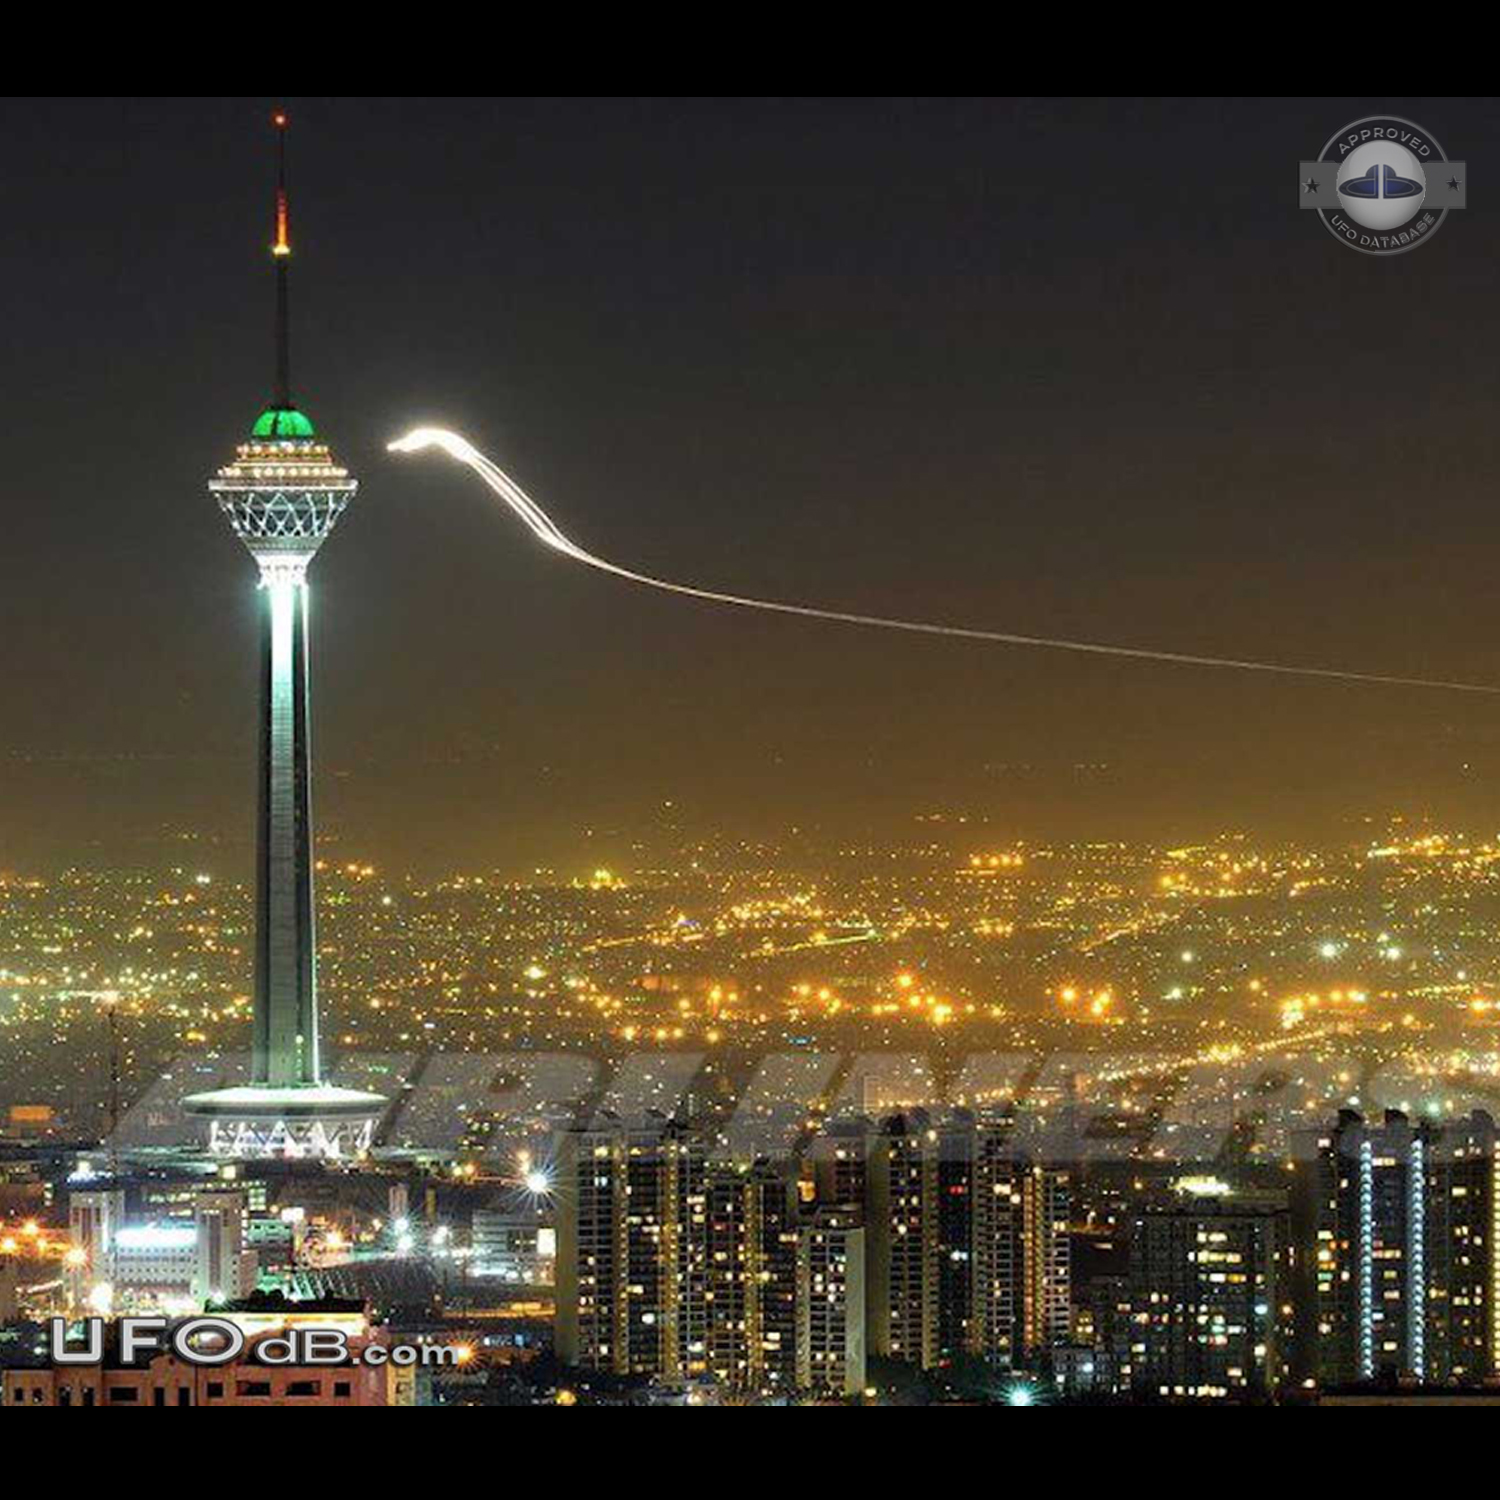 Glowing UFO with long trail near Milad Tower, Tehran, Iran 2012 UFO Picture #437-2